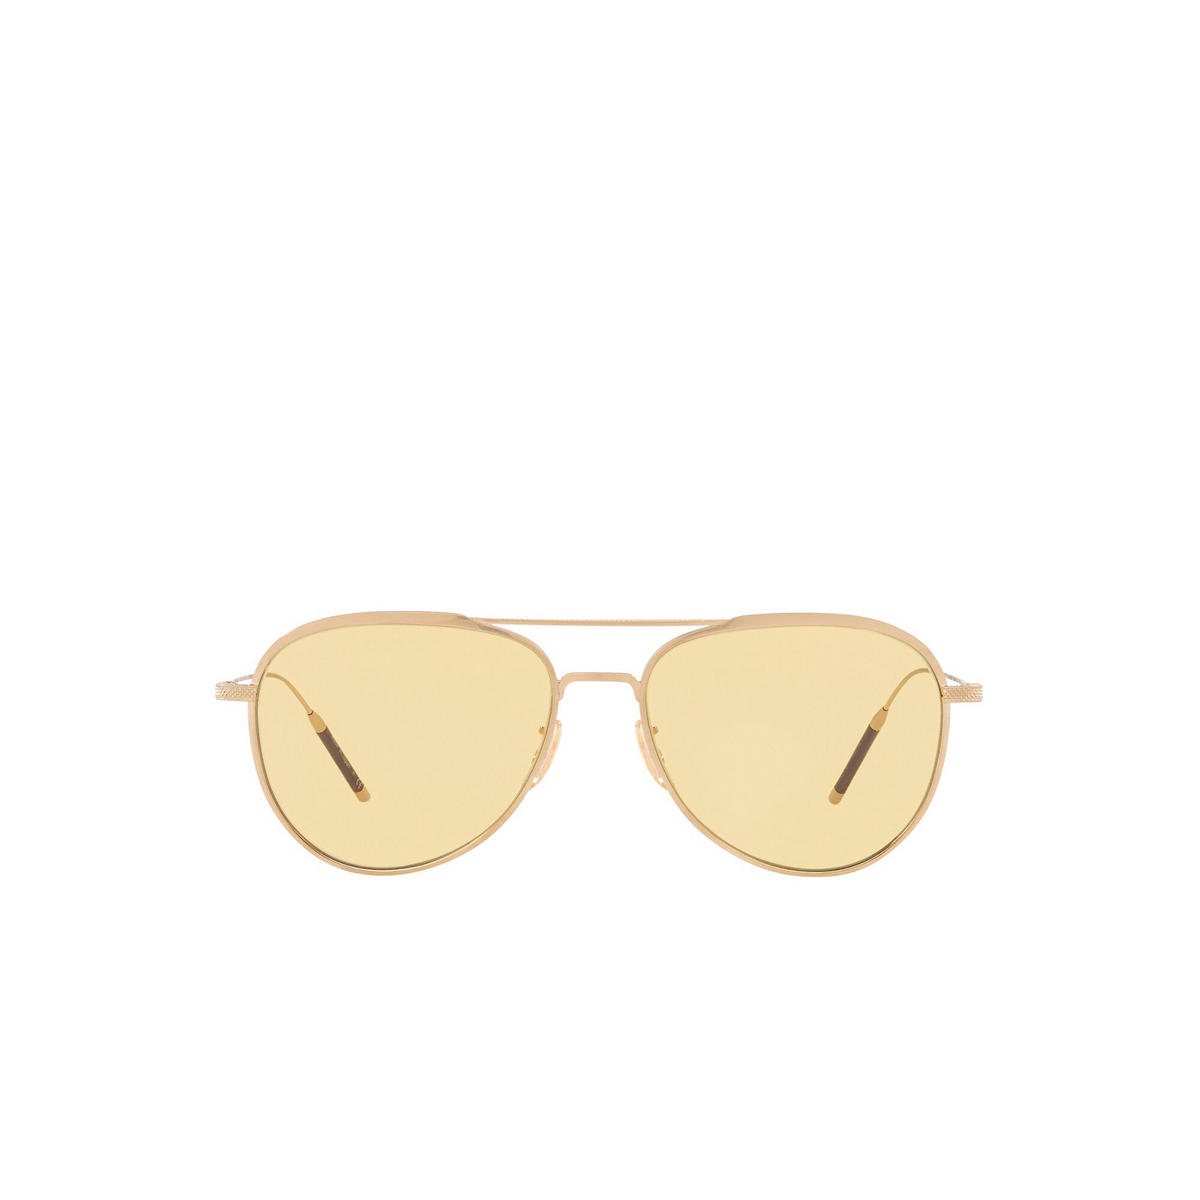 Oliver Peoples TK-3 Sunglasses 5311R6 Brushed Gold - front view